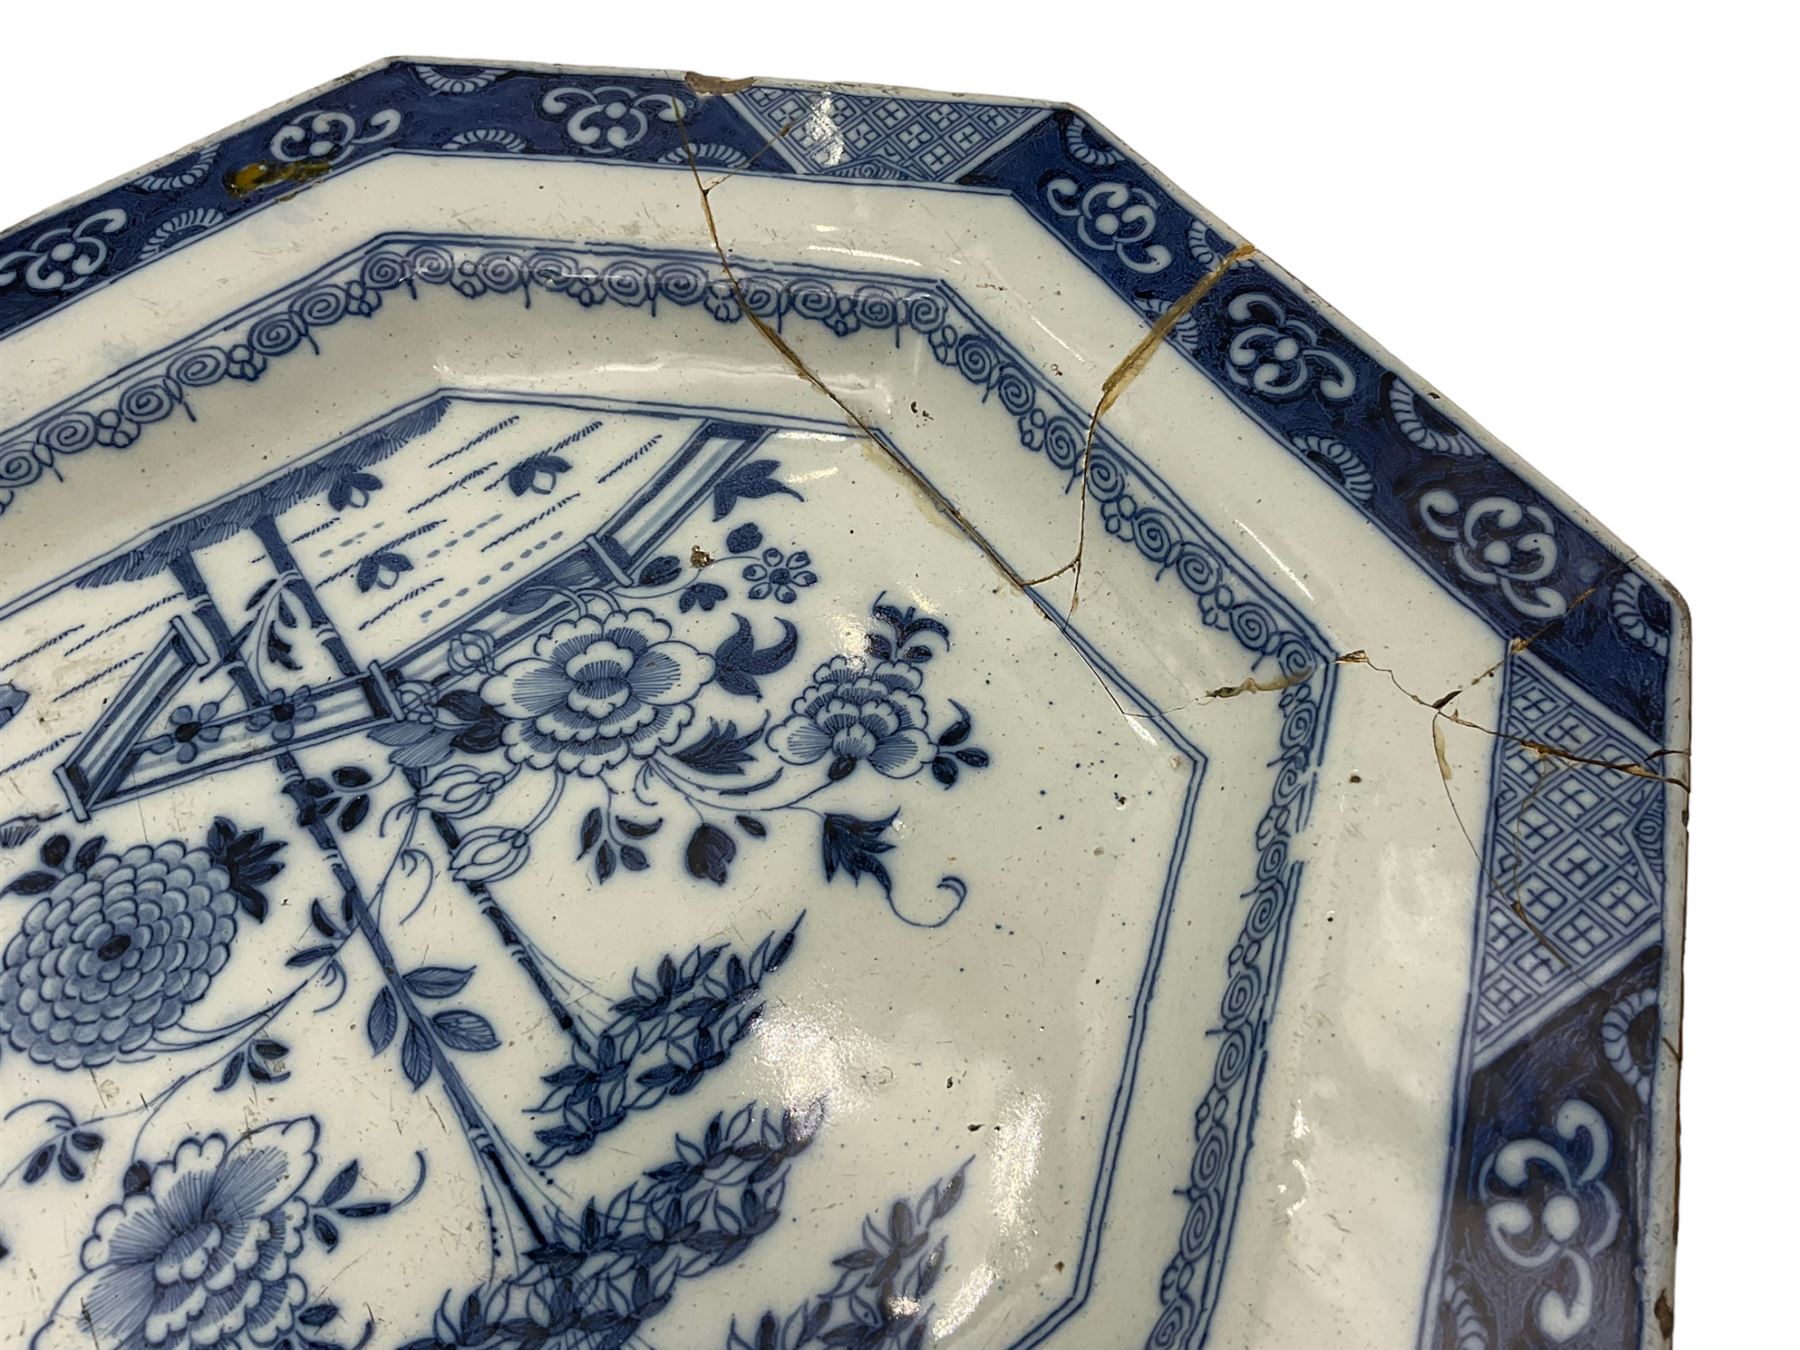 Two 18th century Chinese export octagonal platters - Image 4 of 7